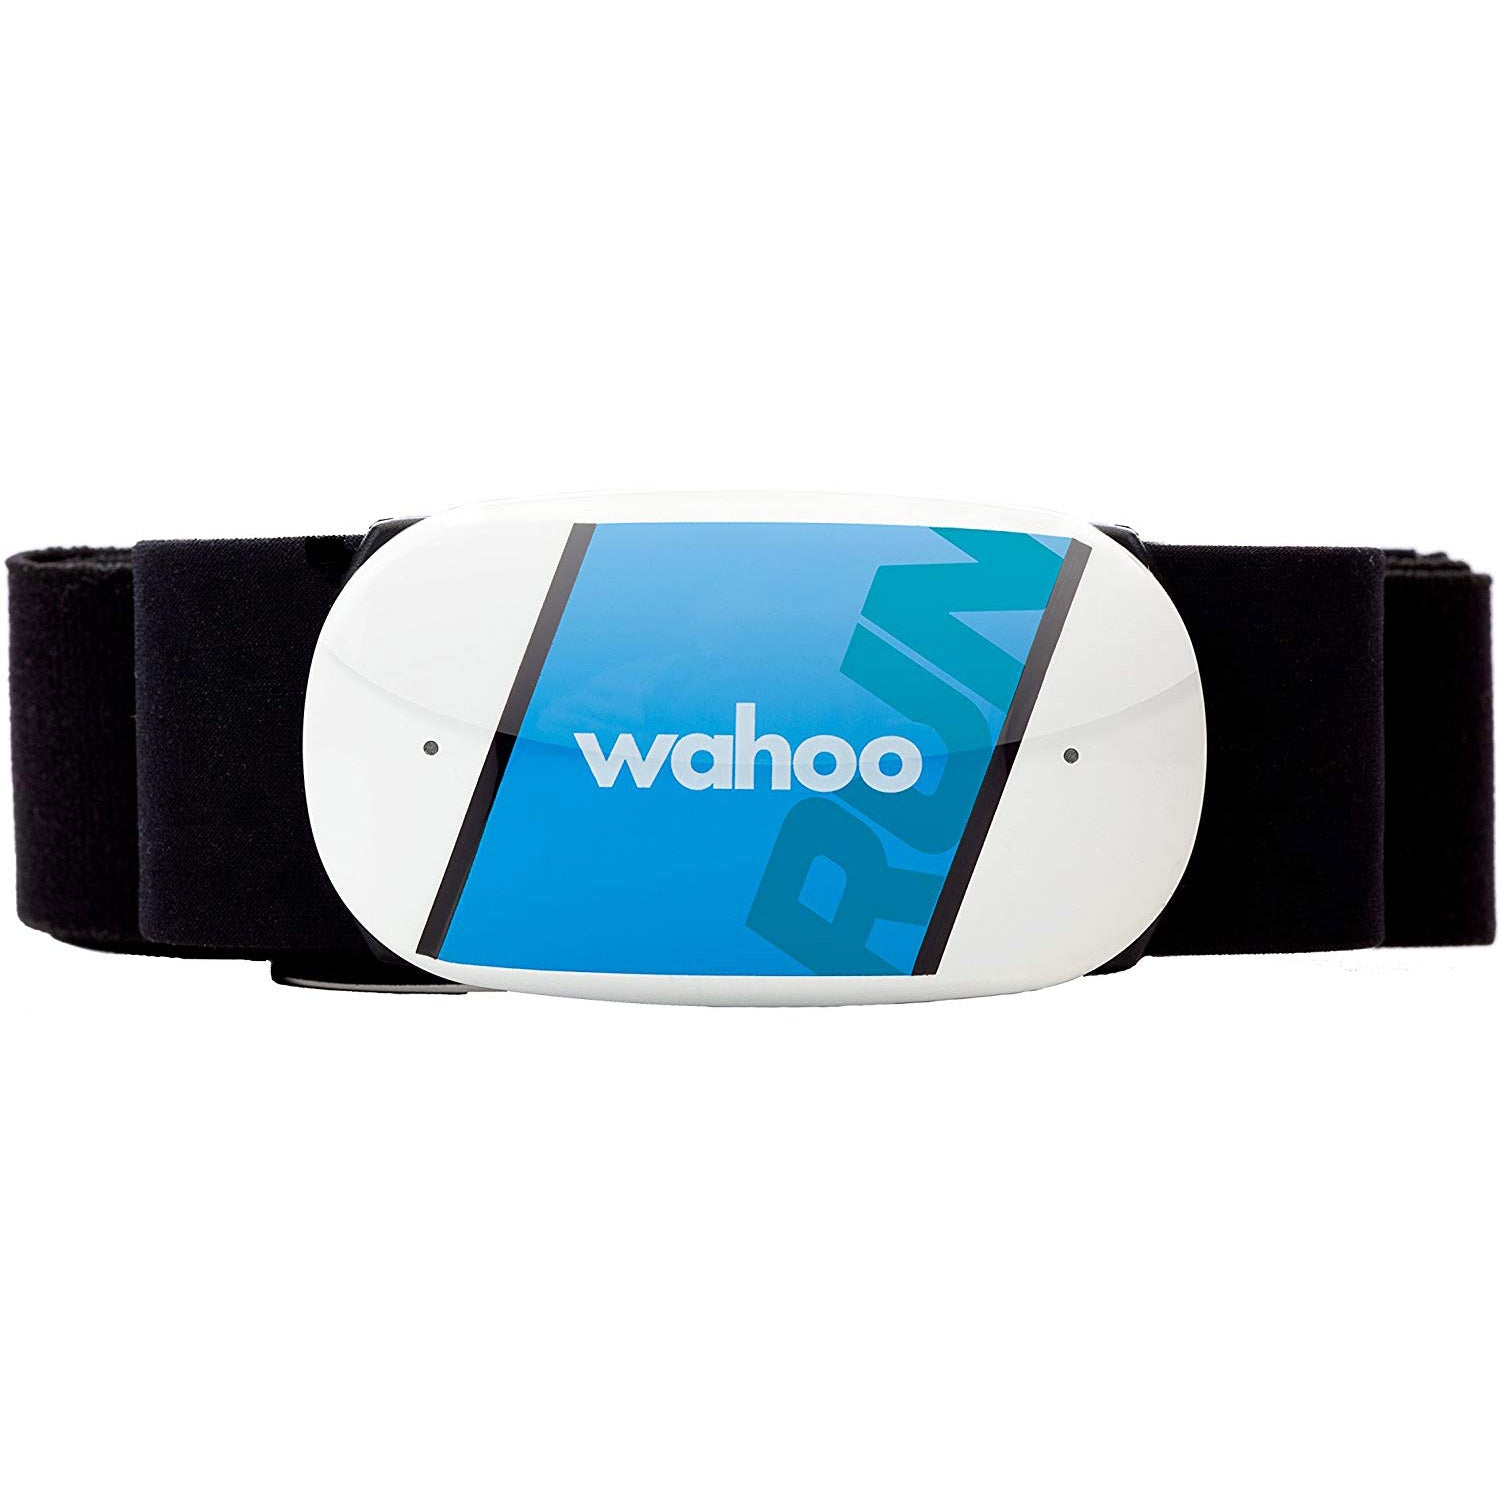 Wahoo TICKR X HEART RATE MONITOR